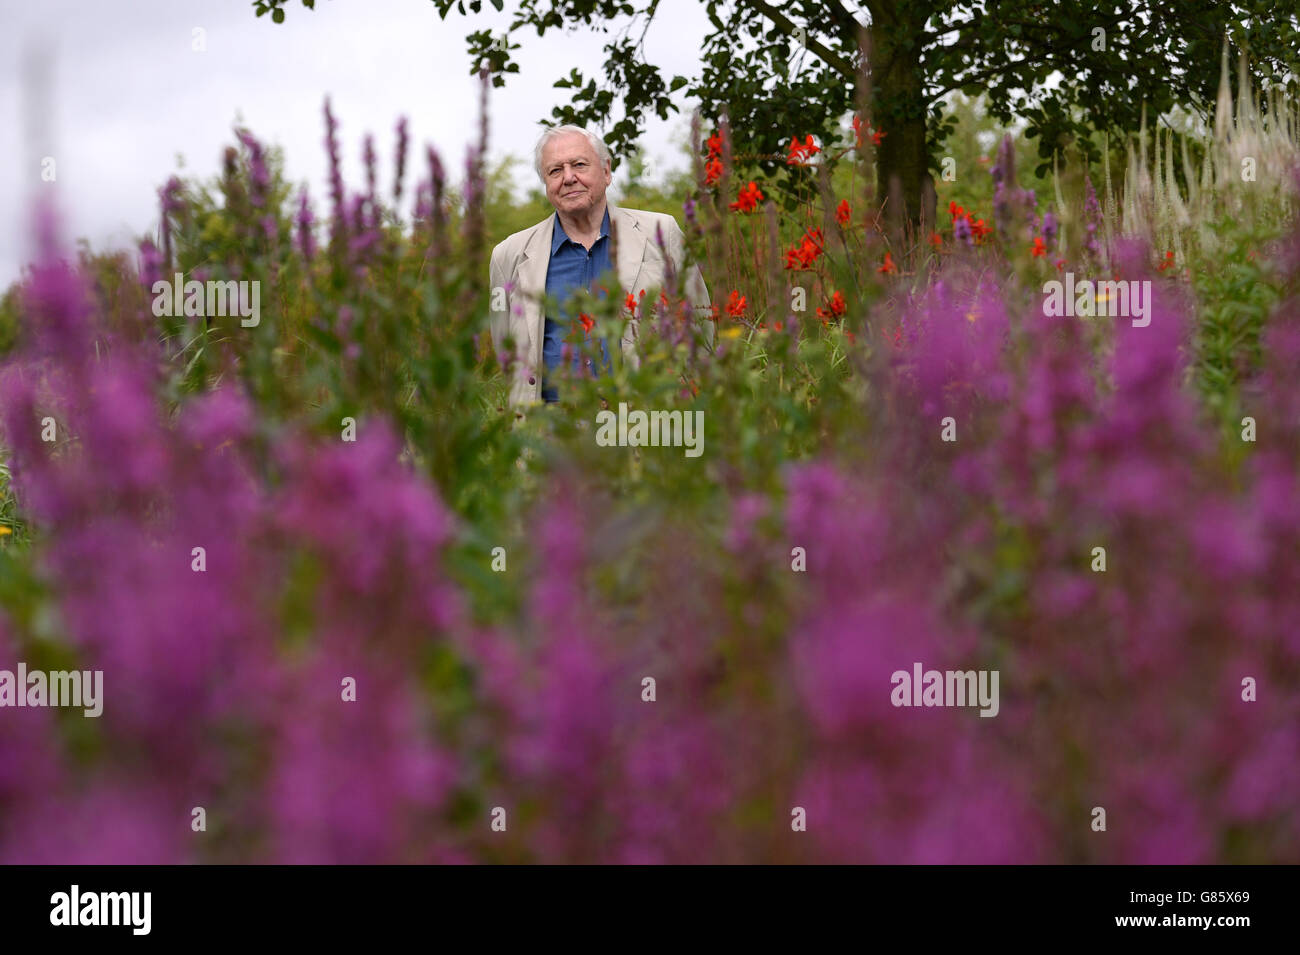 Sir David Attenborough visits the London Wetland Centre in west London where he launched his new campaign to raise public awareness to help reverse the butterfly decline, urging the public to plant butterfly-friendly flowers in their garden to help reverse declining numbers of the insects. Stock Photo